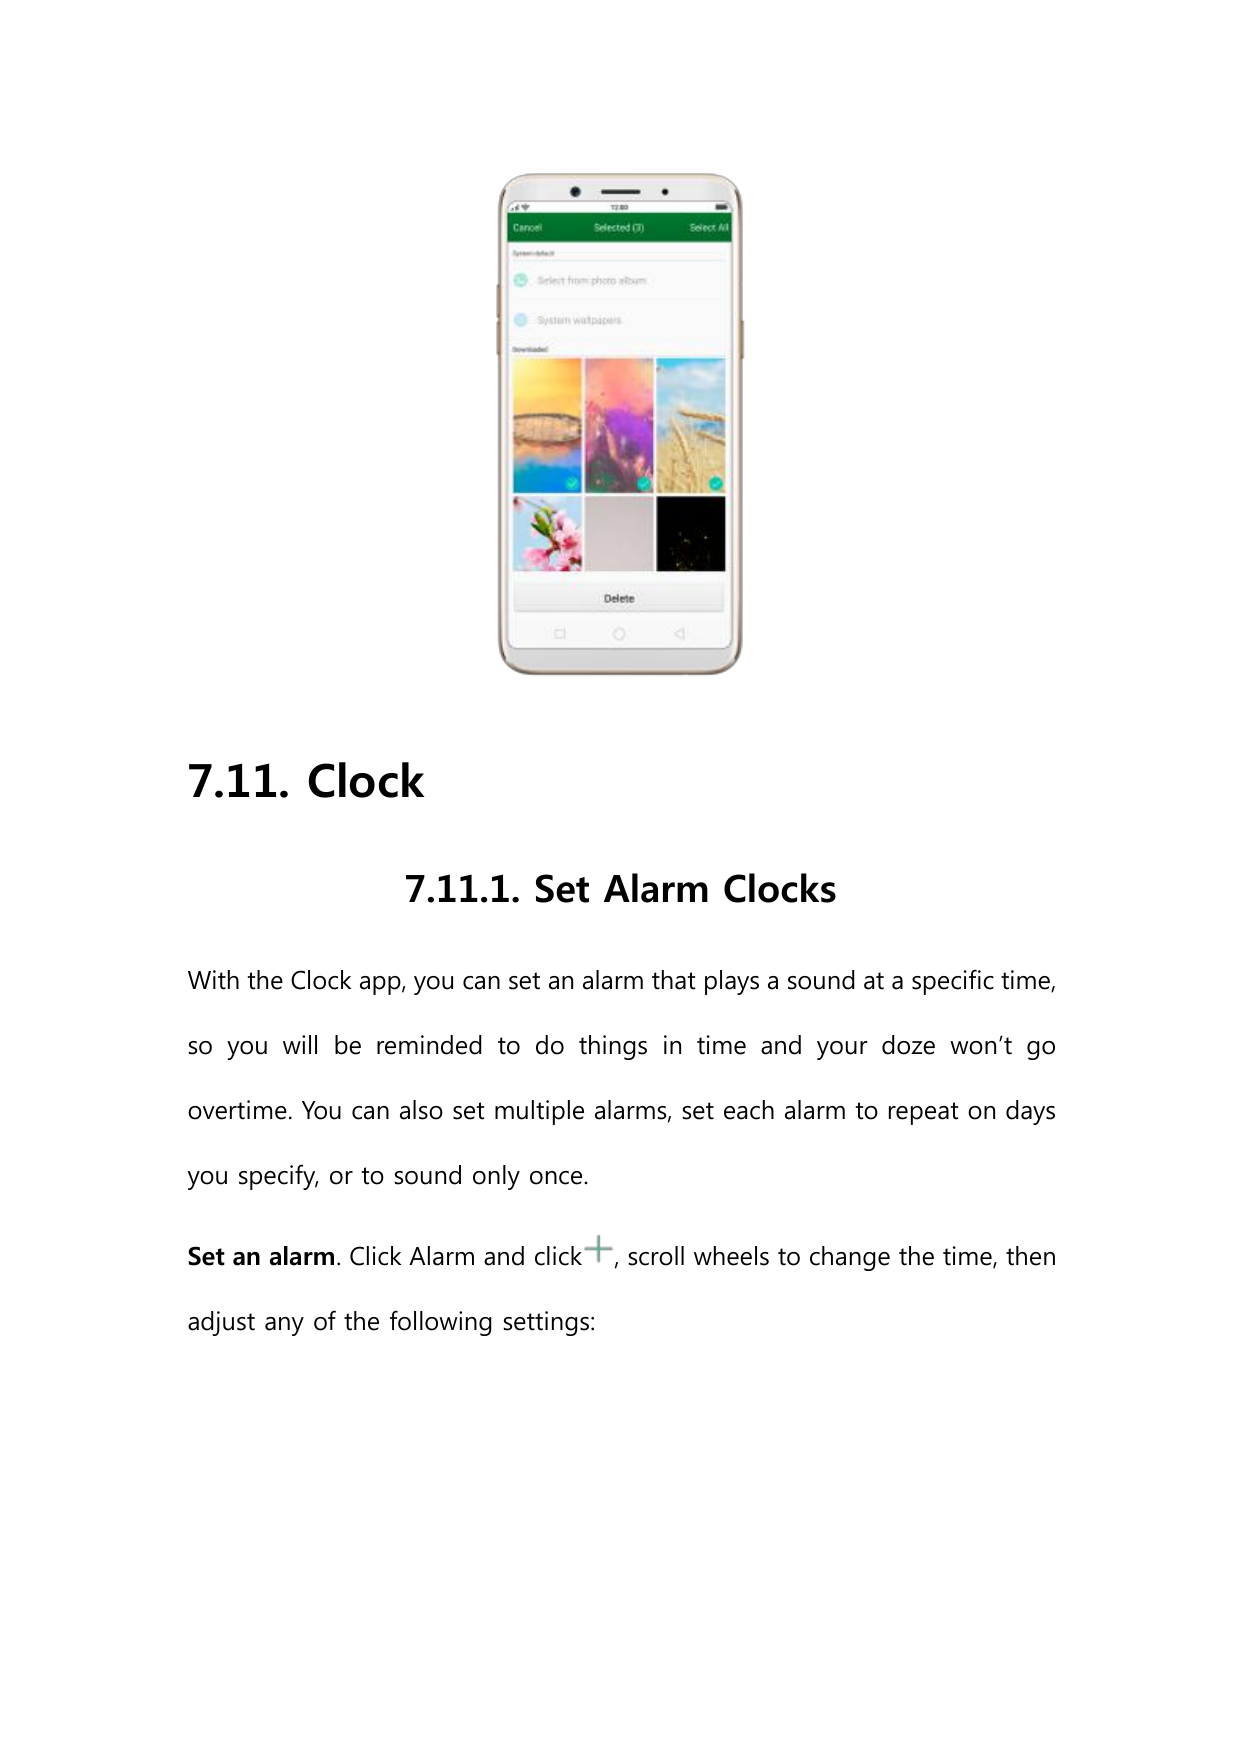 7.11. Clock7.11.1. Set Alarm ClocksWith the Clock app, you can set an alarm that plays a sound at a specific time,so you will be